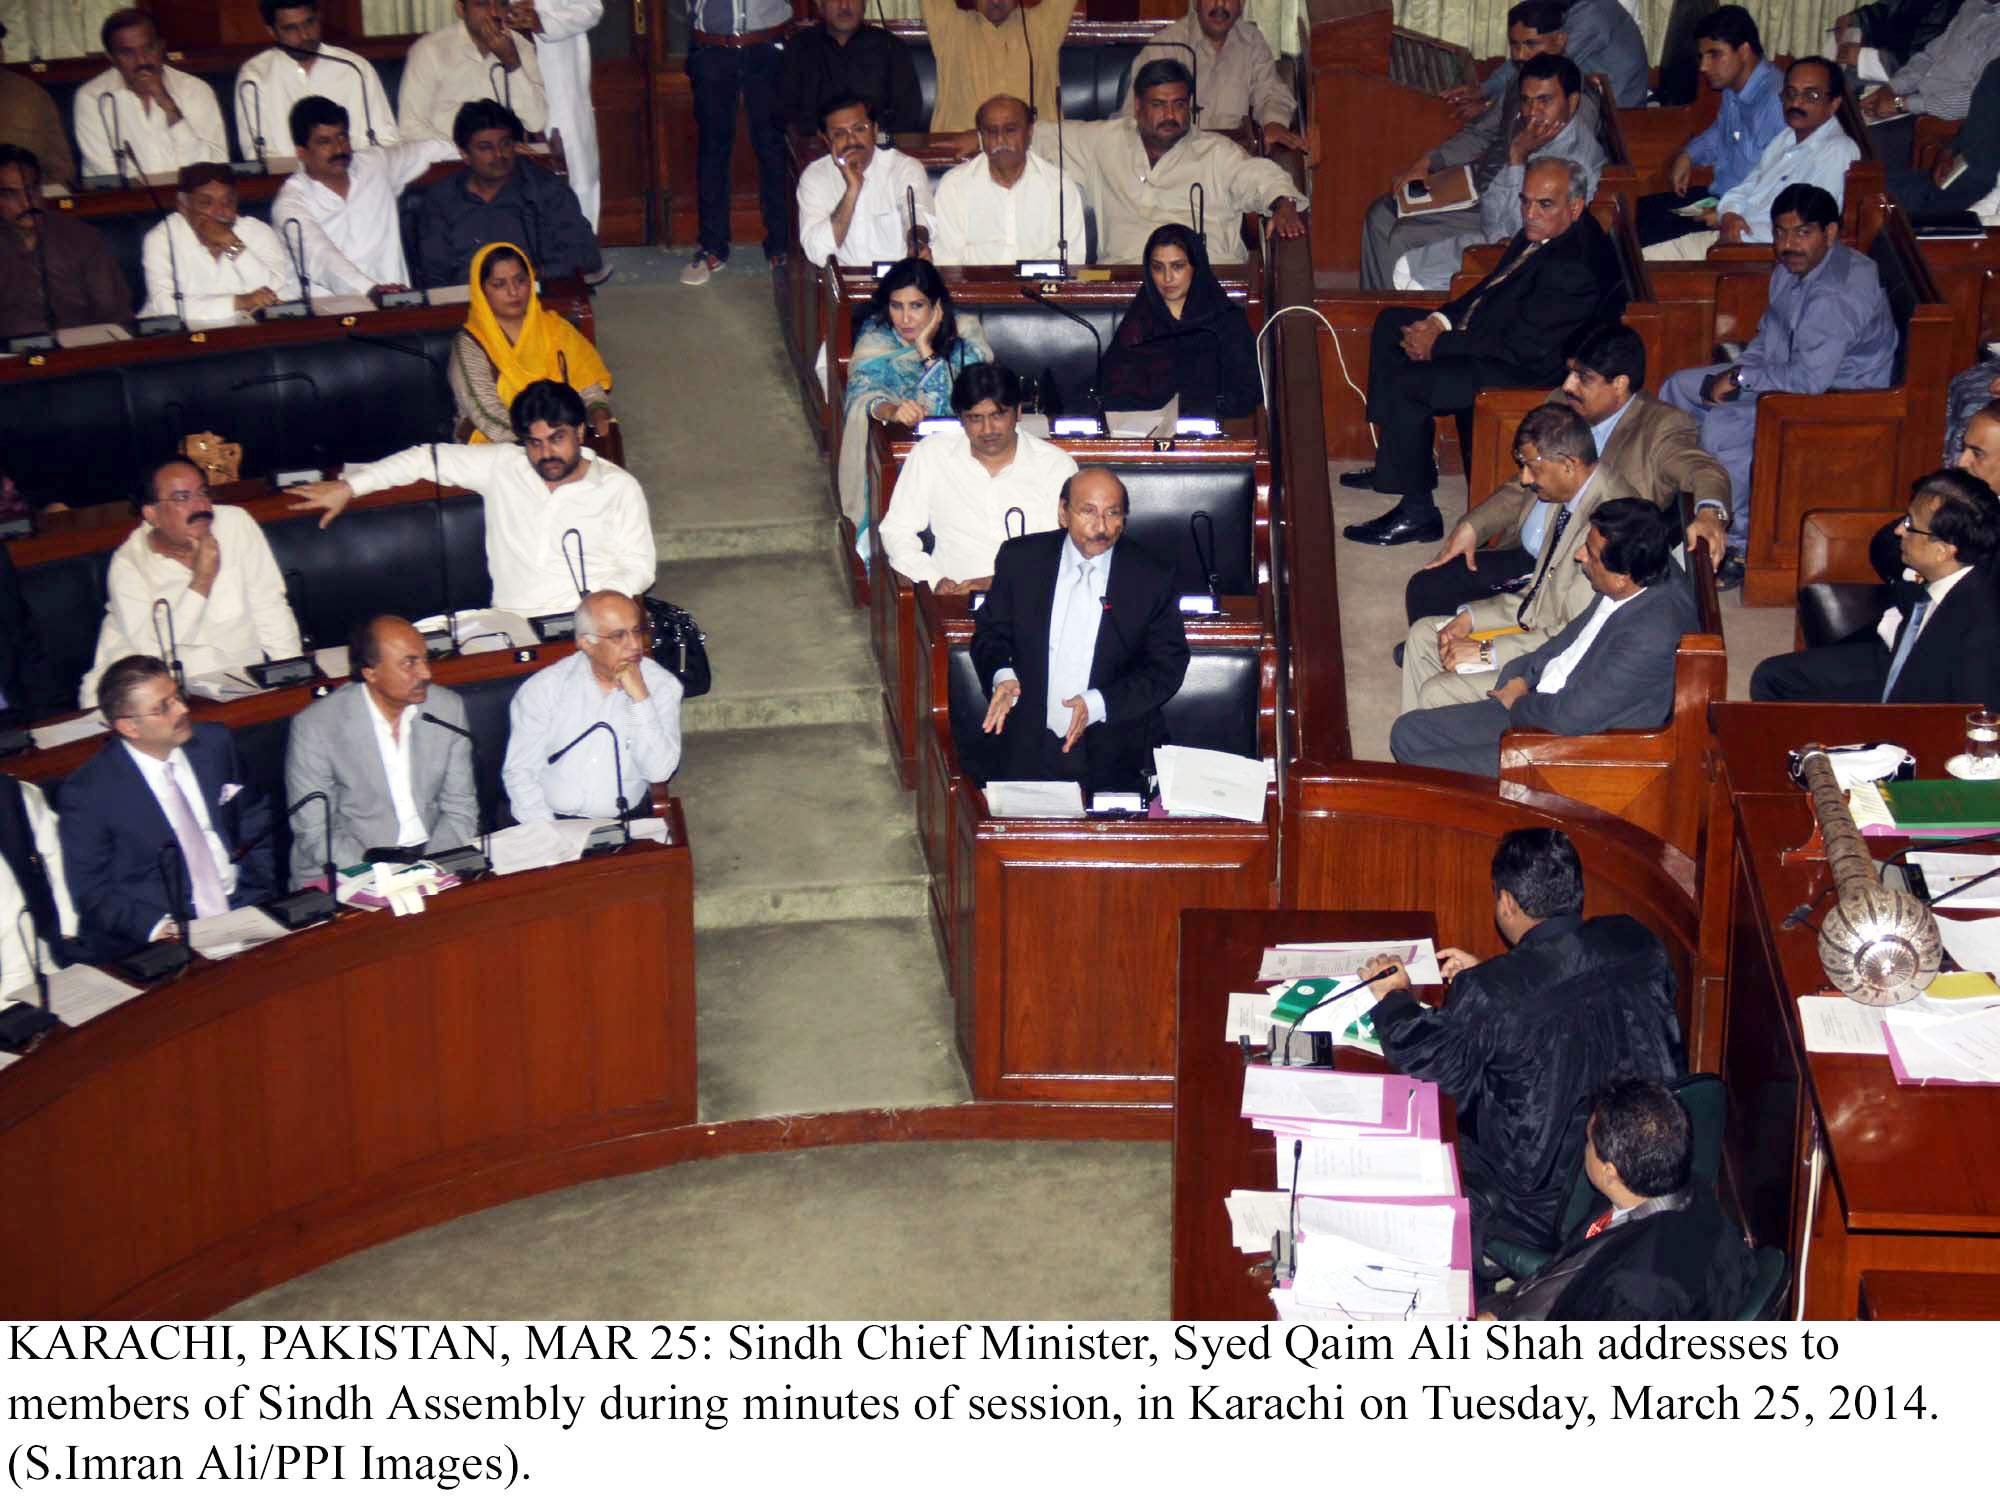 sindh chief minister qaim ali shah addressing the sindh assembly on tuesday photo ppi